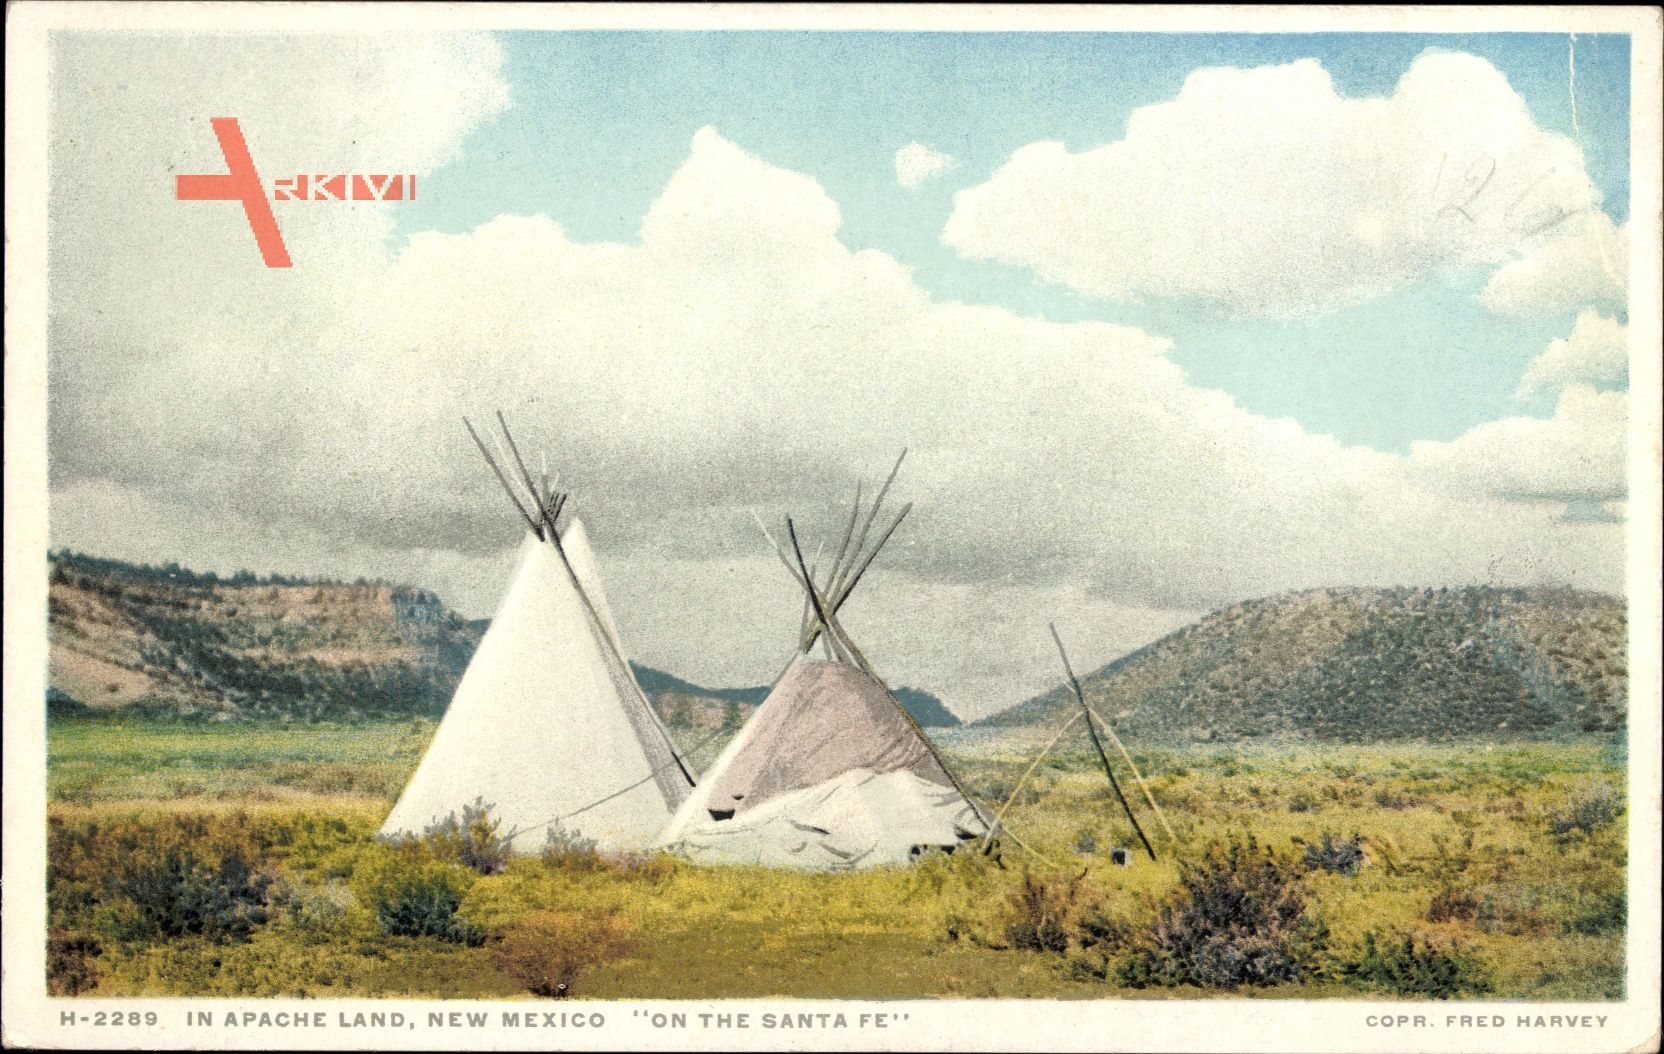 In Apache Land, New Mexico USA, On the Santa Fe, Indianerzelte, Tipis